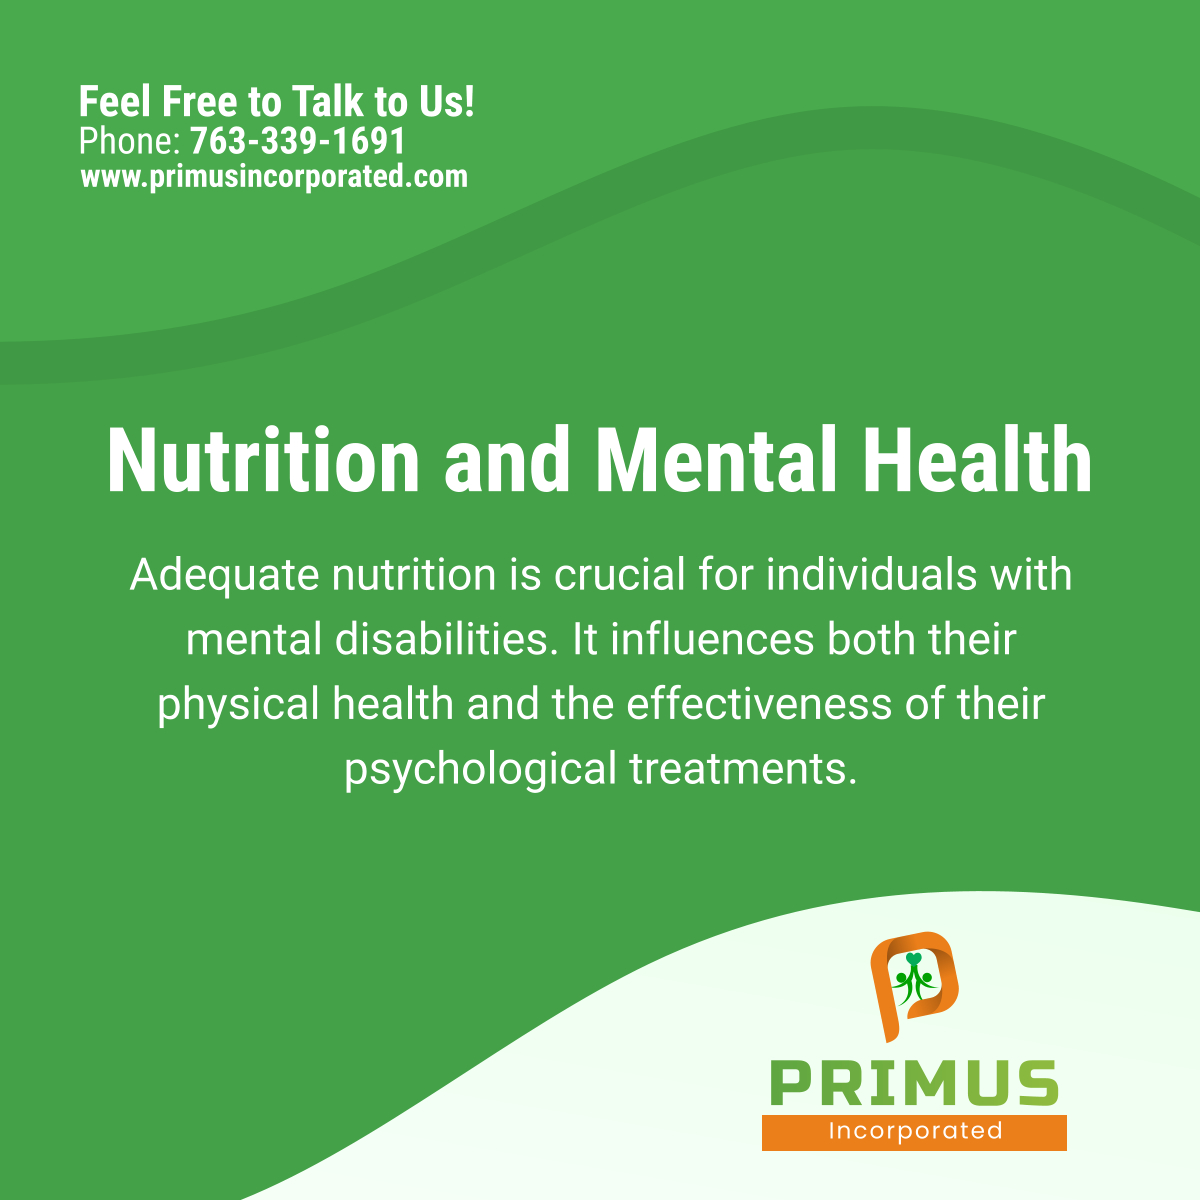 Proper nutrition is crucial for those with mental disabilities, supporting medication efficacy and overall well-being. Understanding the links between diet and mental health is essential for comprehensive care. 

#BrooklynParkMN #DietAndWellness #NutritionalPsychiatry